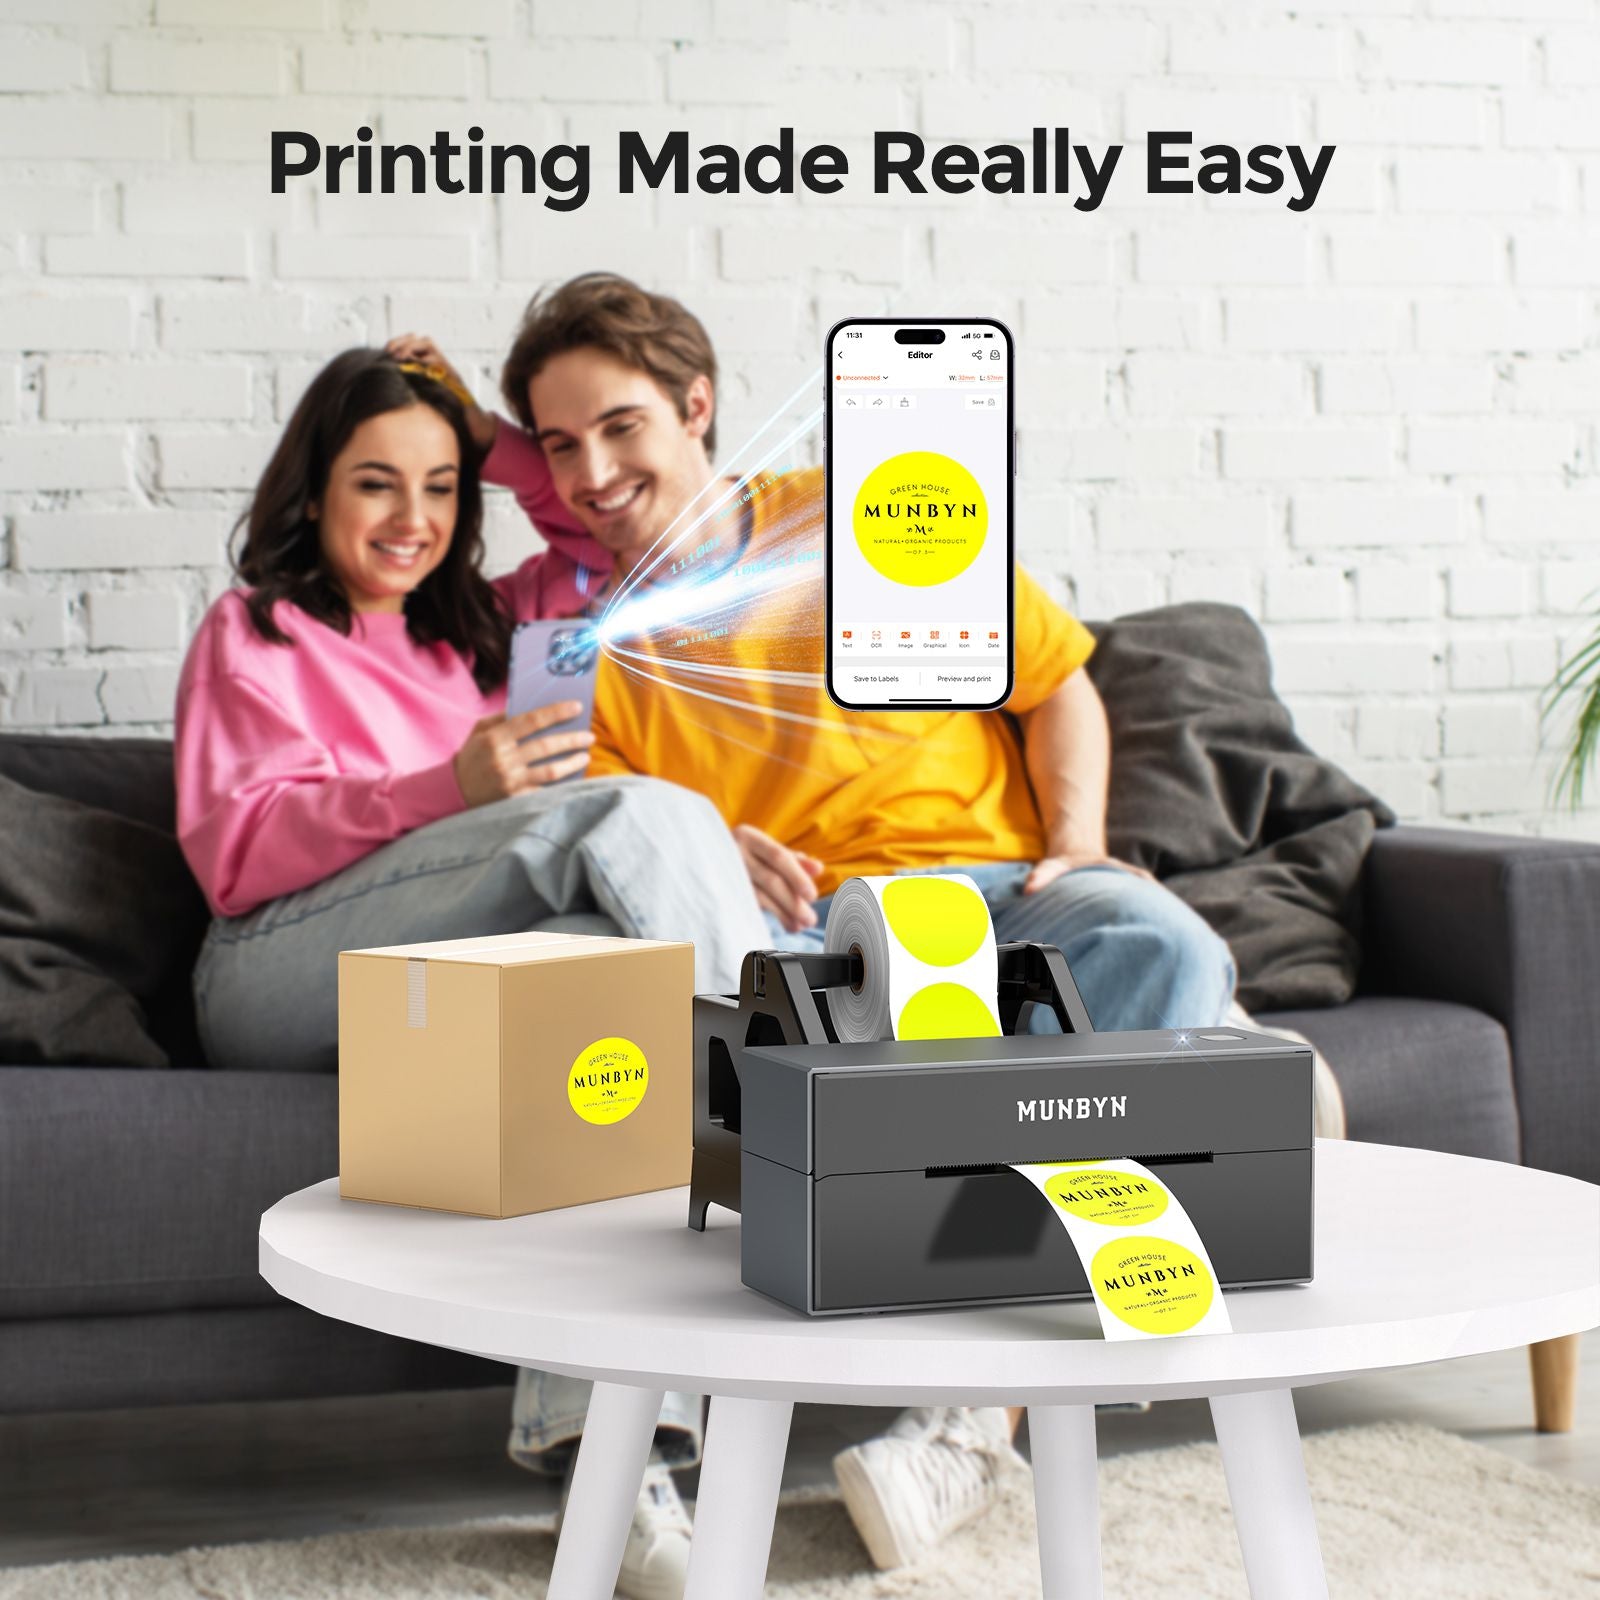 Create and customize label templates on their mobile devices and then send them wirelessly to the Bluetooth printer for printing.